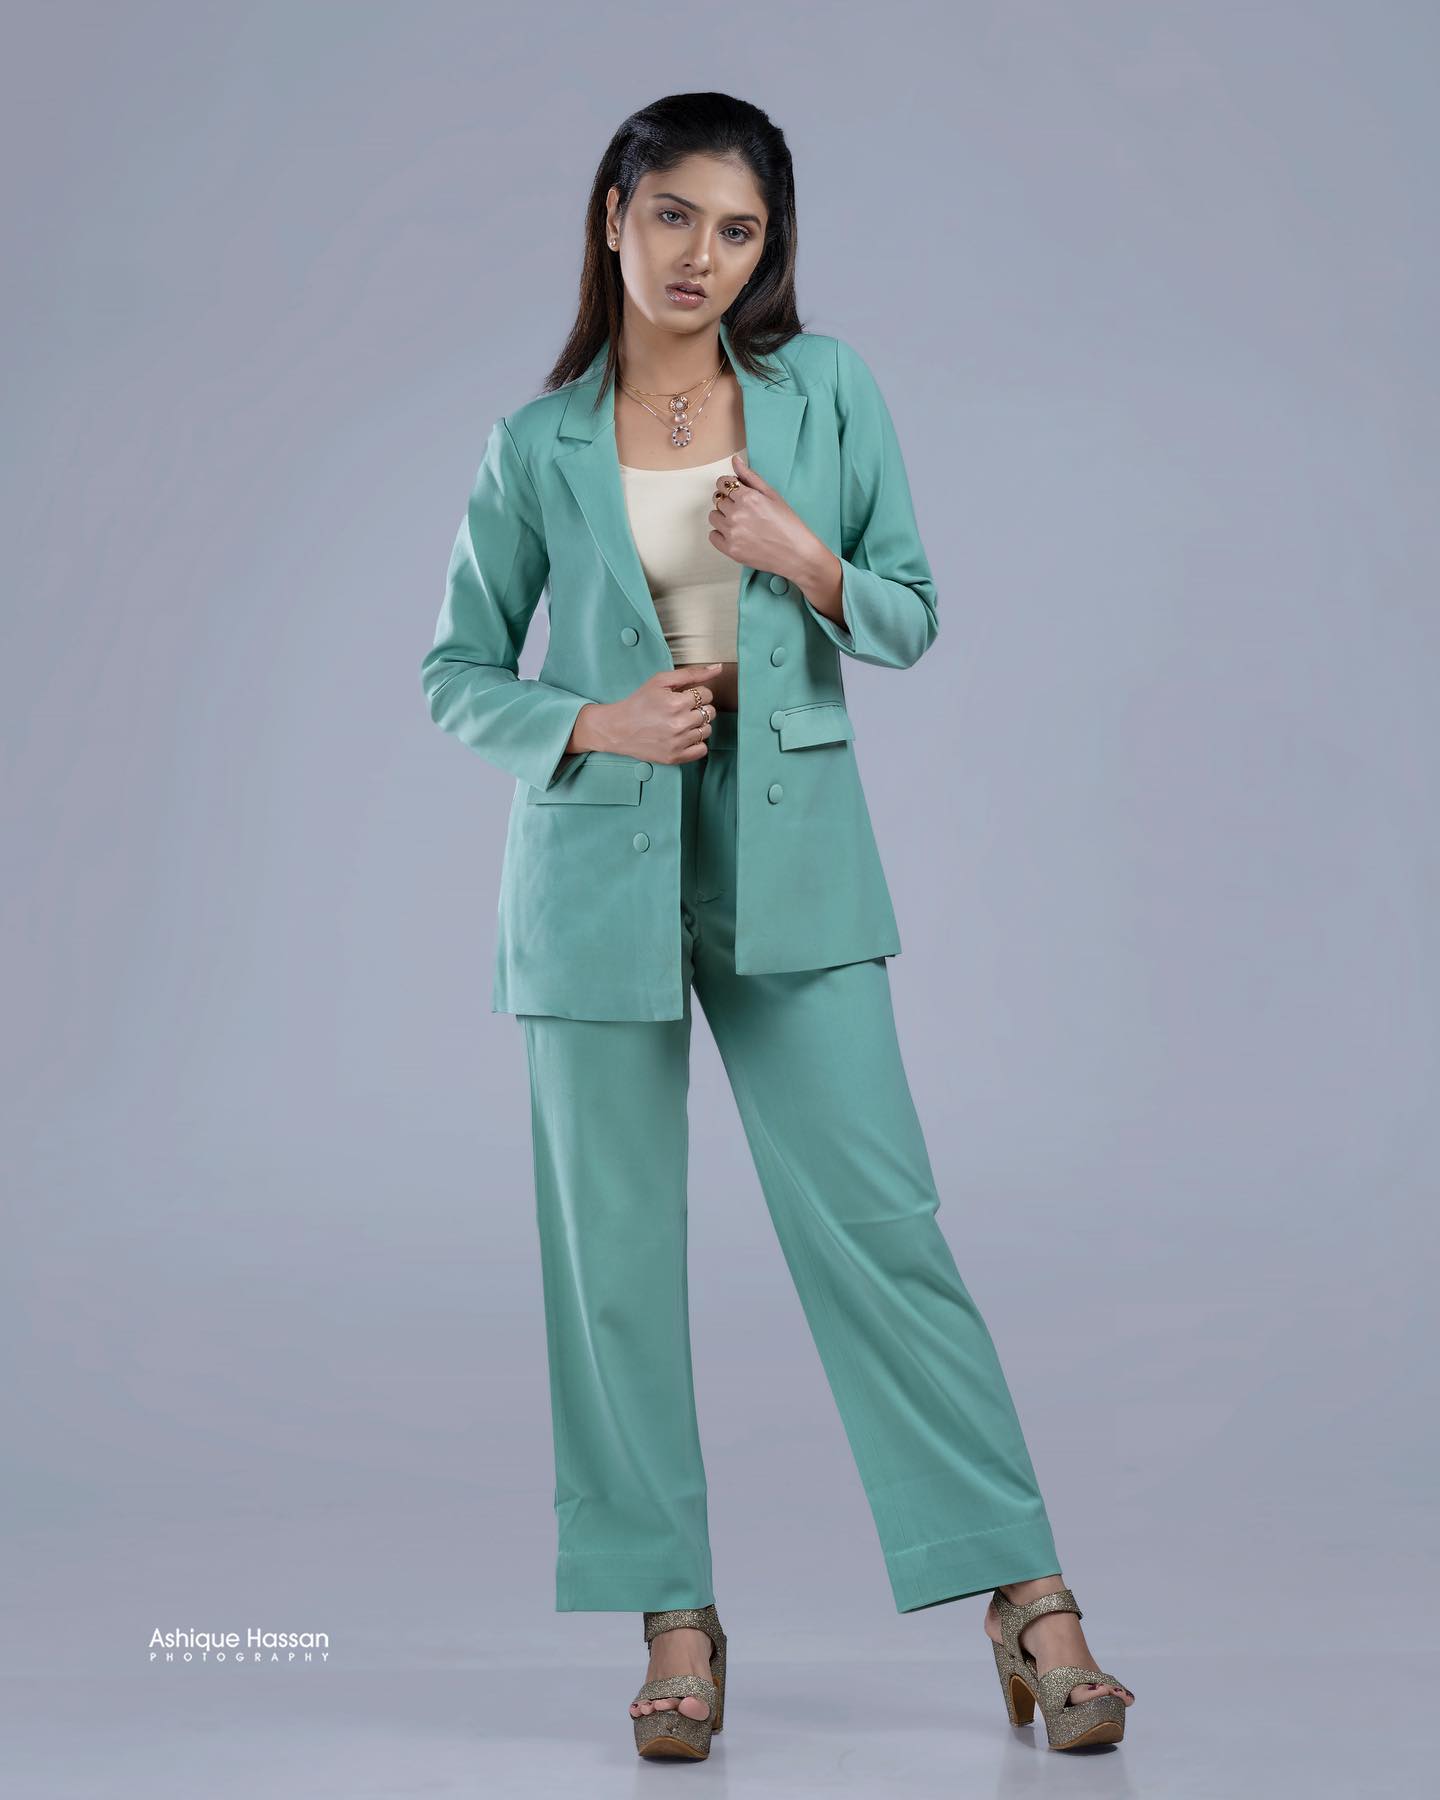 Boss Lady Gayathri Suresh In Tiffany Blue Blazer Pants Must Have Outfits &amp; Looks